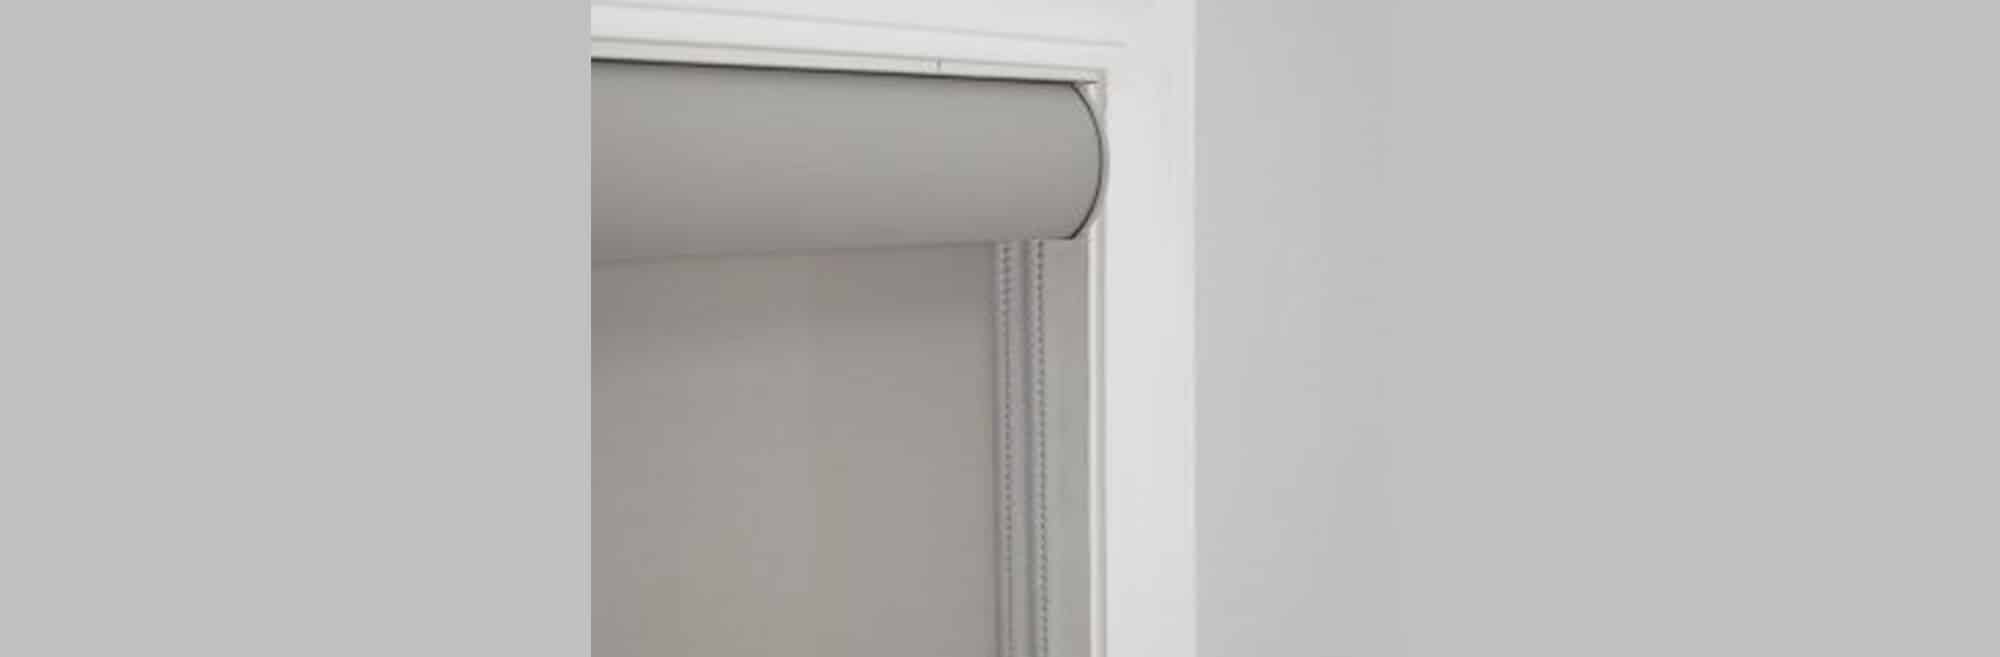 roller-shades-graber-pic-1